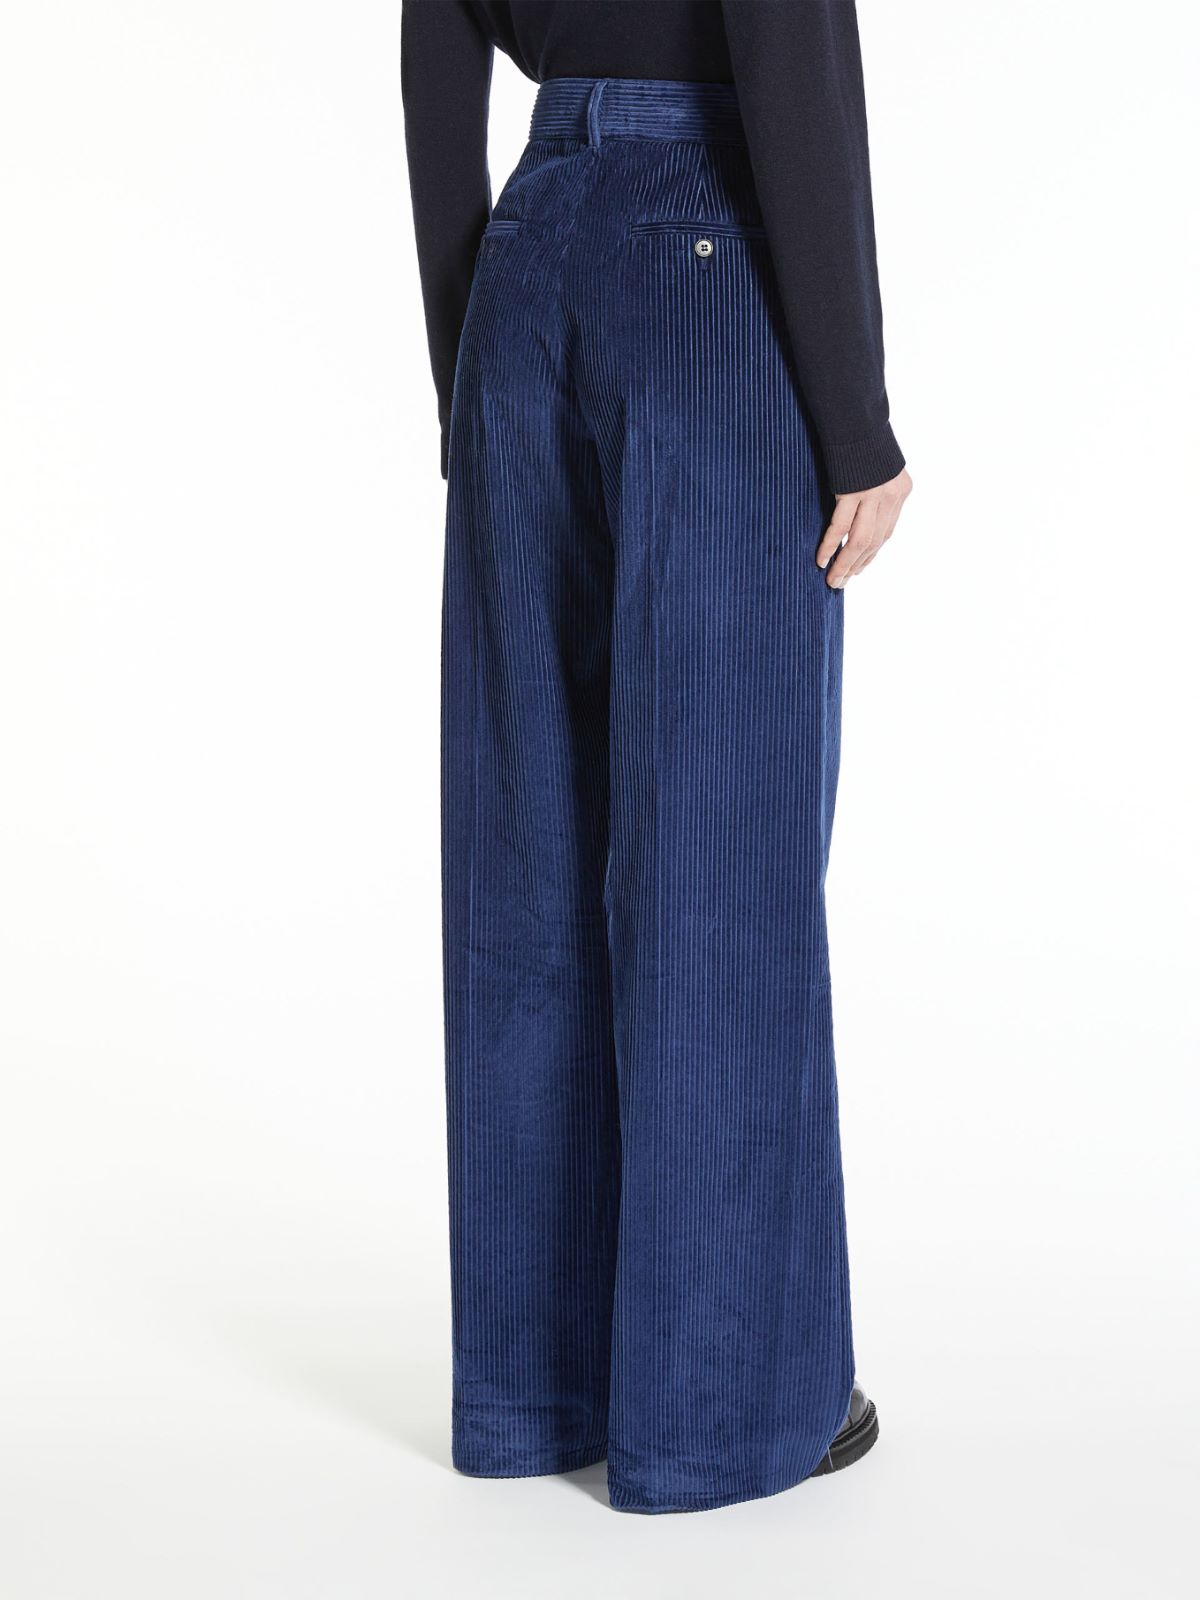 Cotton velvet trousers - CHINA BLUE - Weekend Max Mara - 3